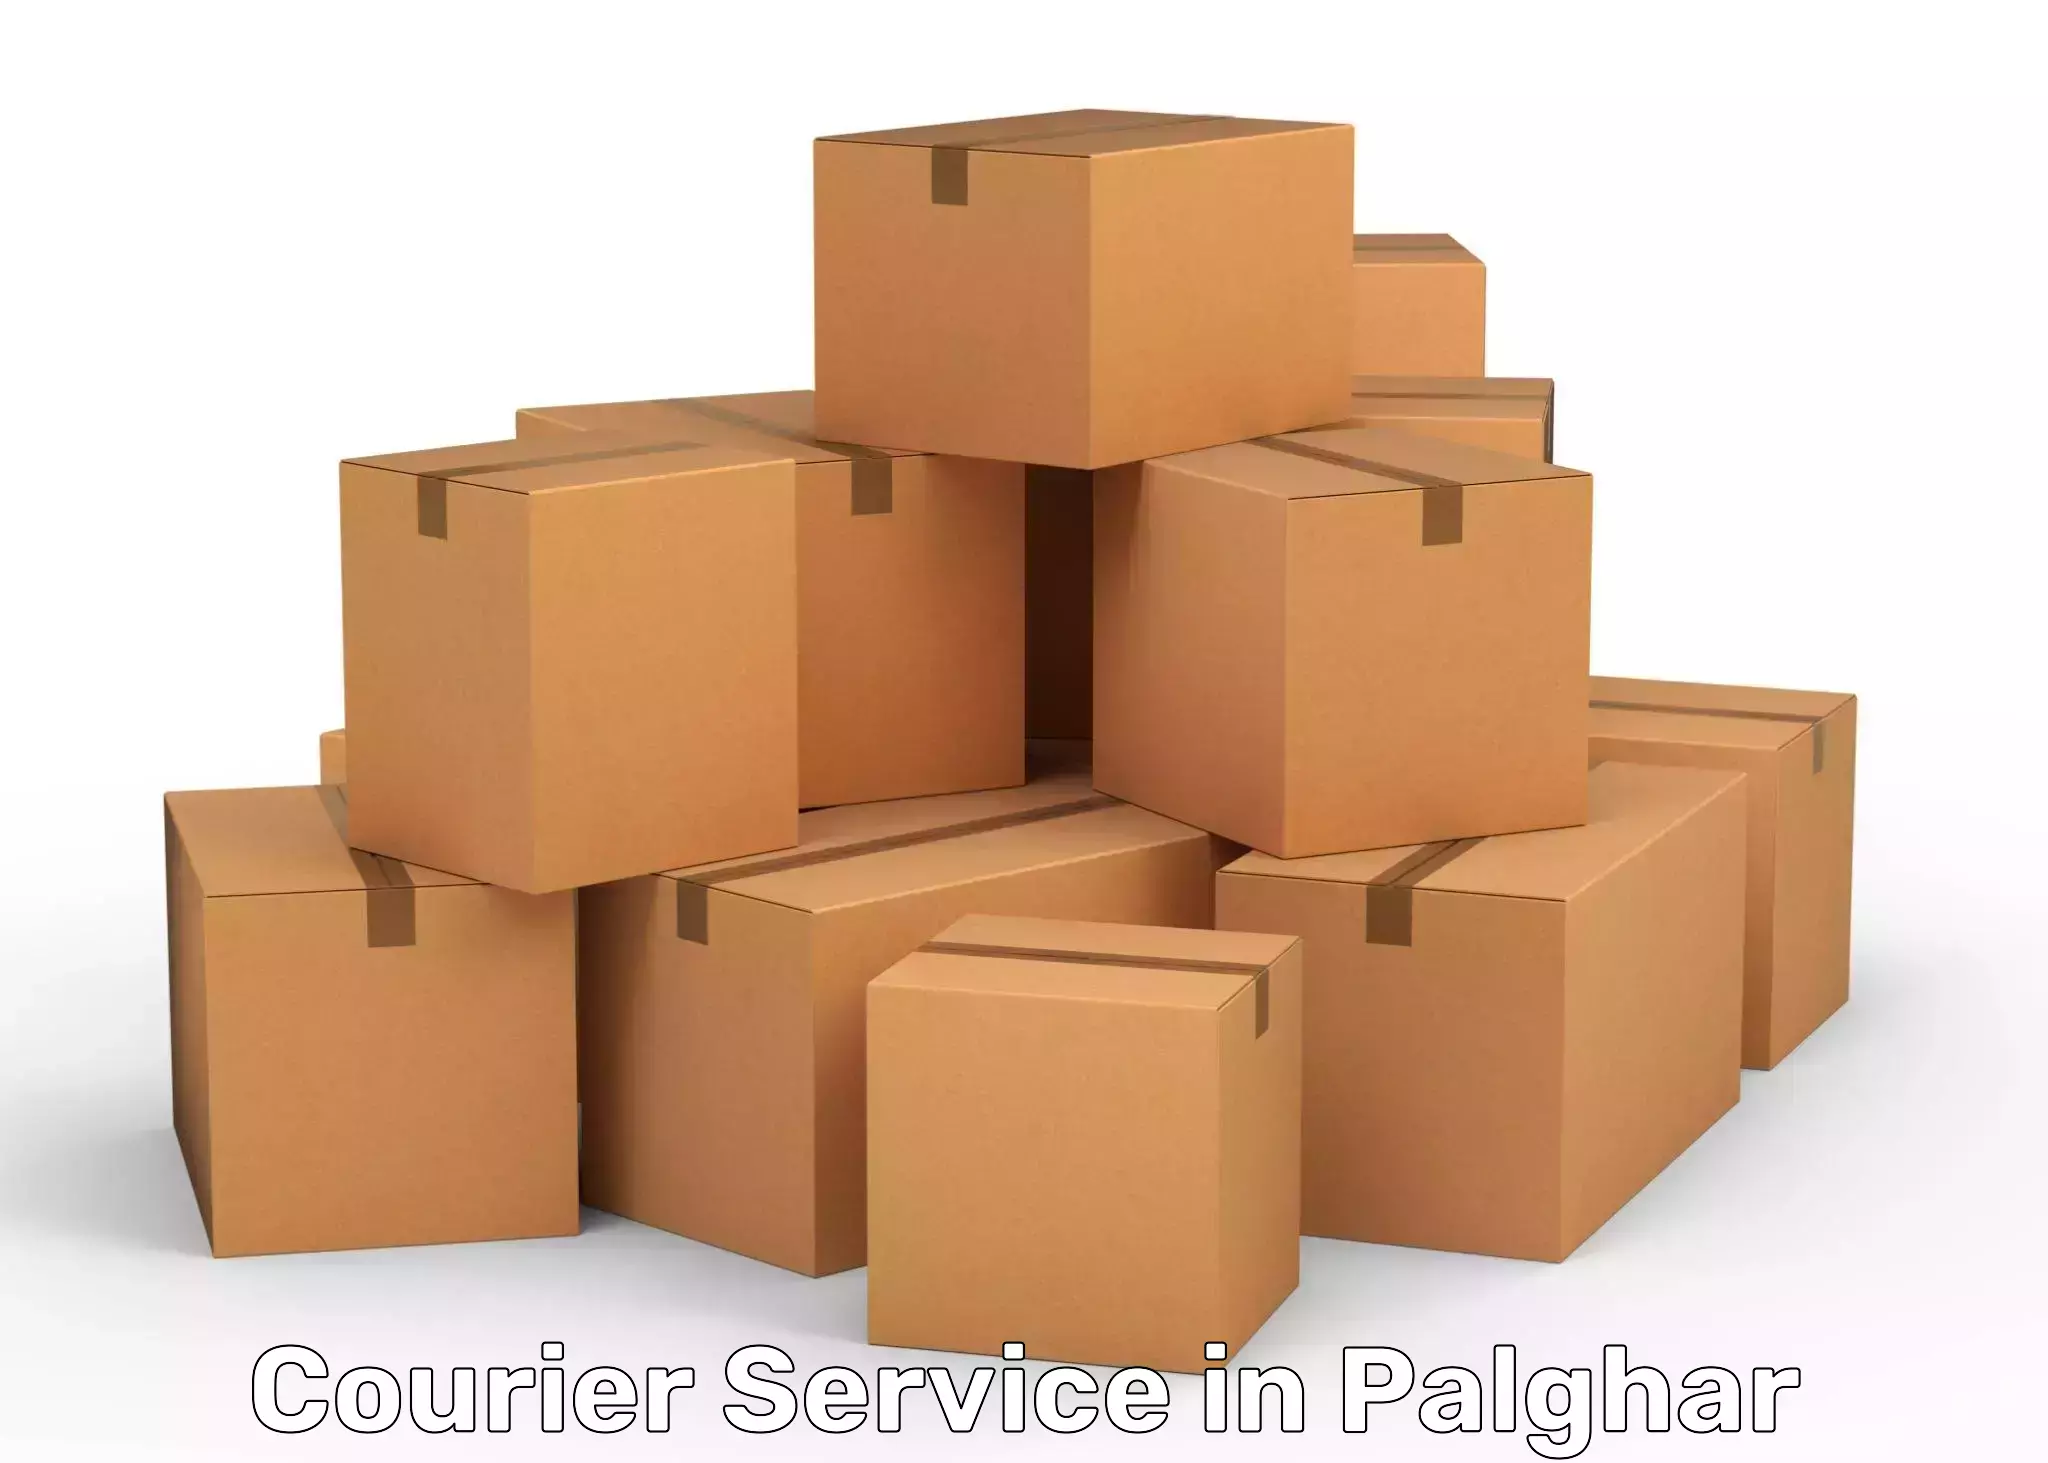 Short distance delivery in Palghar